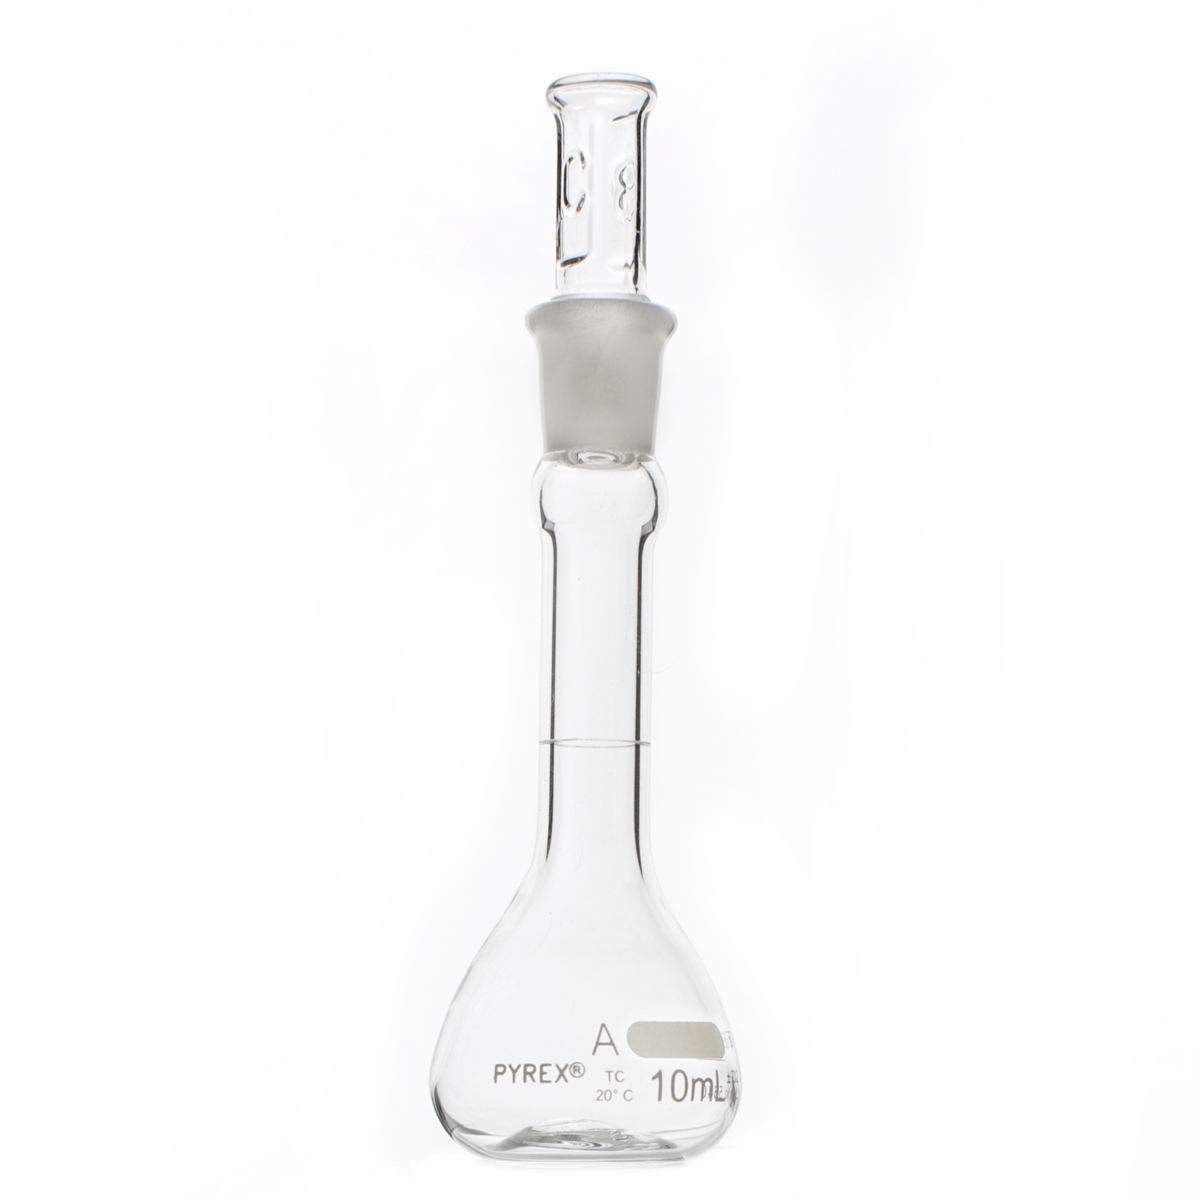 ±0.02 mL Tolerance 9 Stopper Size 99 mm Height x 29 mm OD 10 mL Volume Pack of 12 Corning 5640-10 Pyrex Class A Volumetric Flask with Taper Glass Stopper 